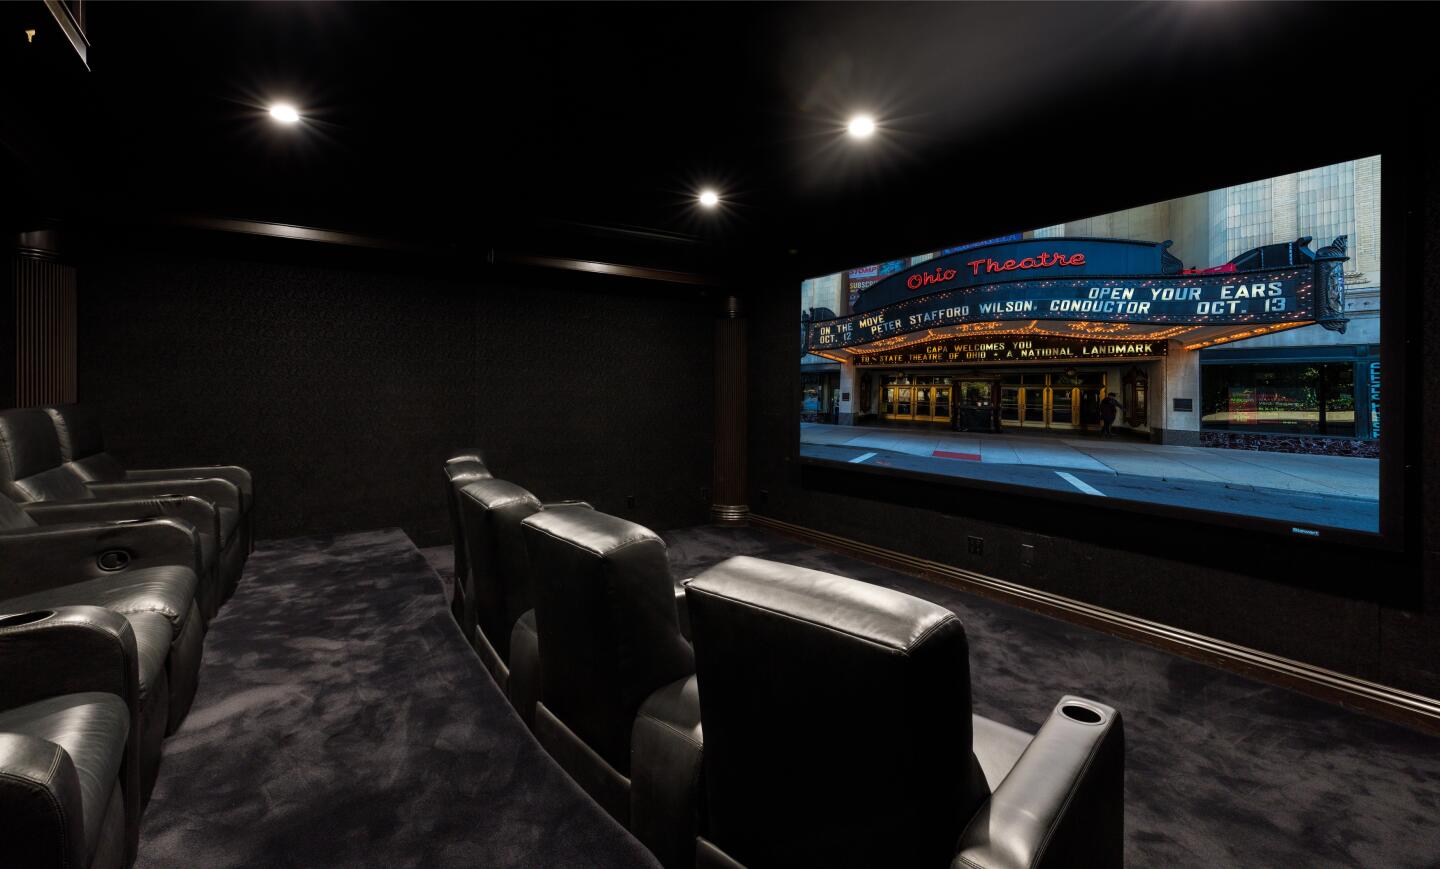 Two stacked rows of reclining seats face a large screen.